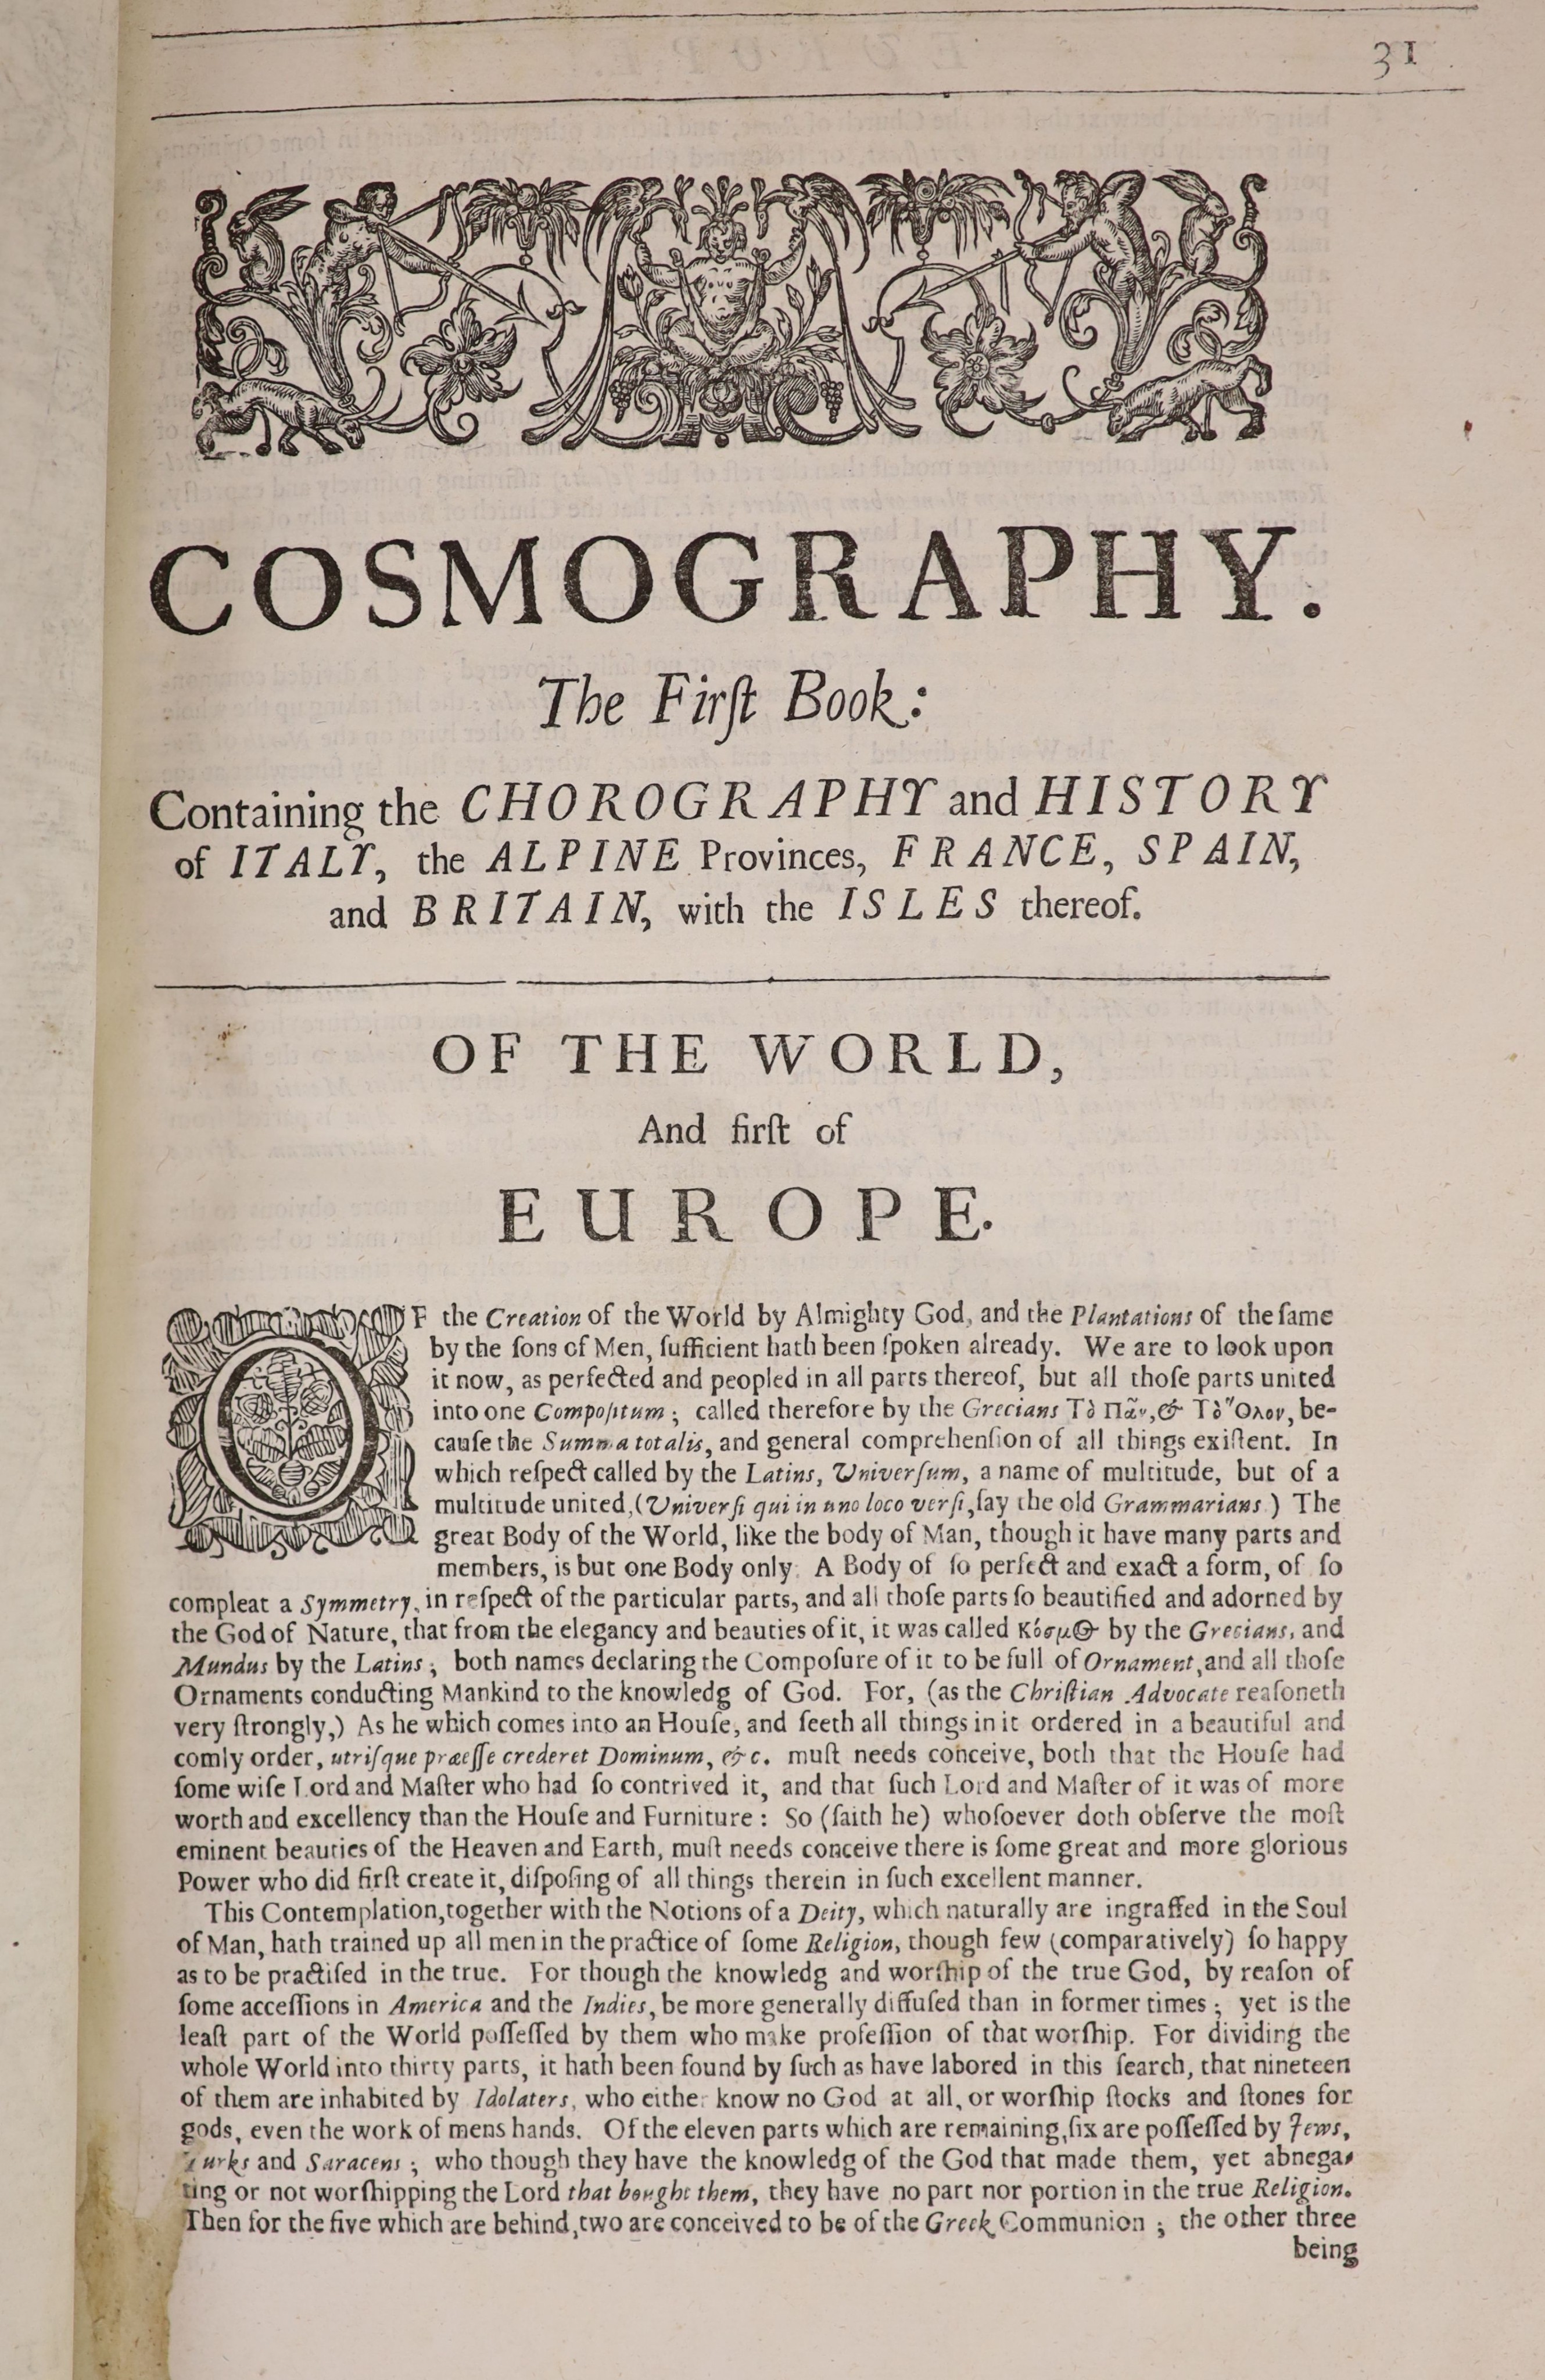 Heylyn, Peter. Cosmographie, in Four Books. Containing the Chorographie and Historie of the Whole Word, and all the principal kingdoms, provinces, seas, and isles thereof ... revised and corrected by the author ...